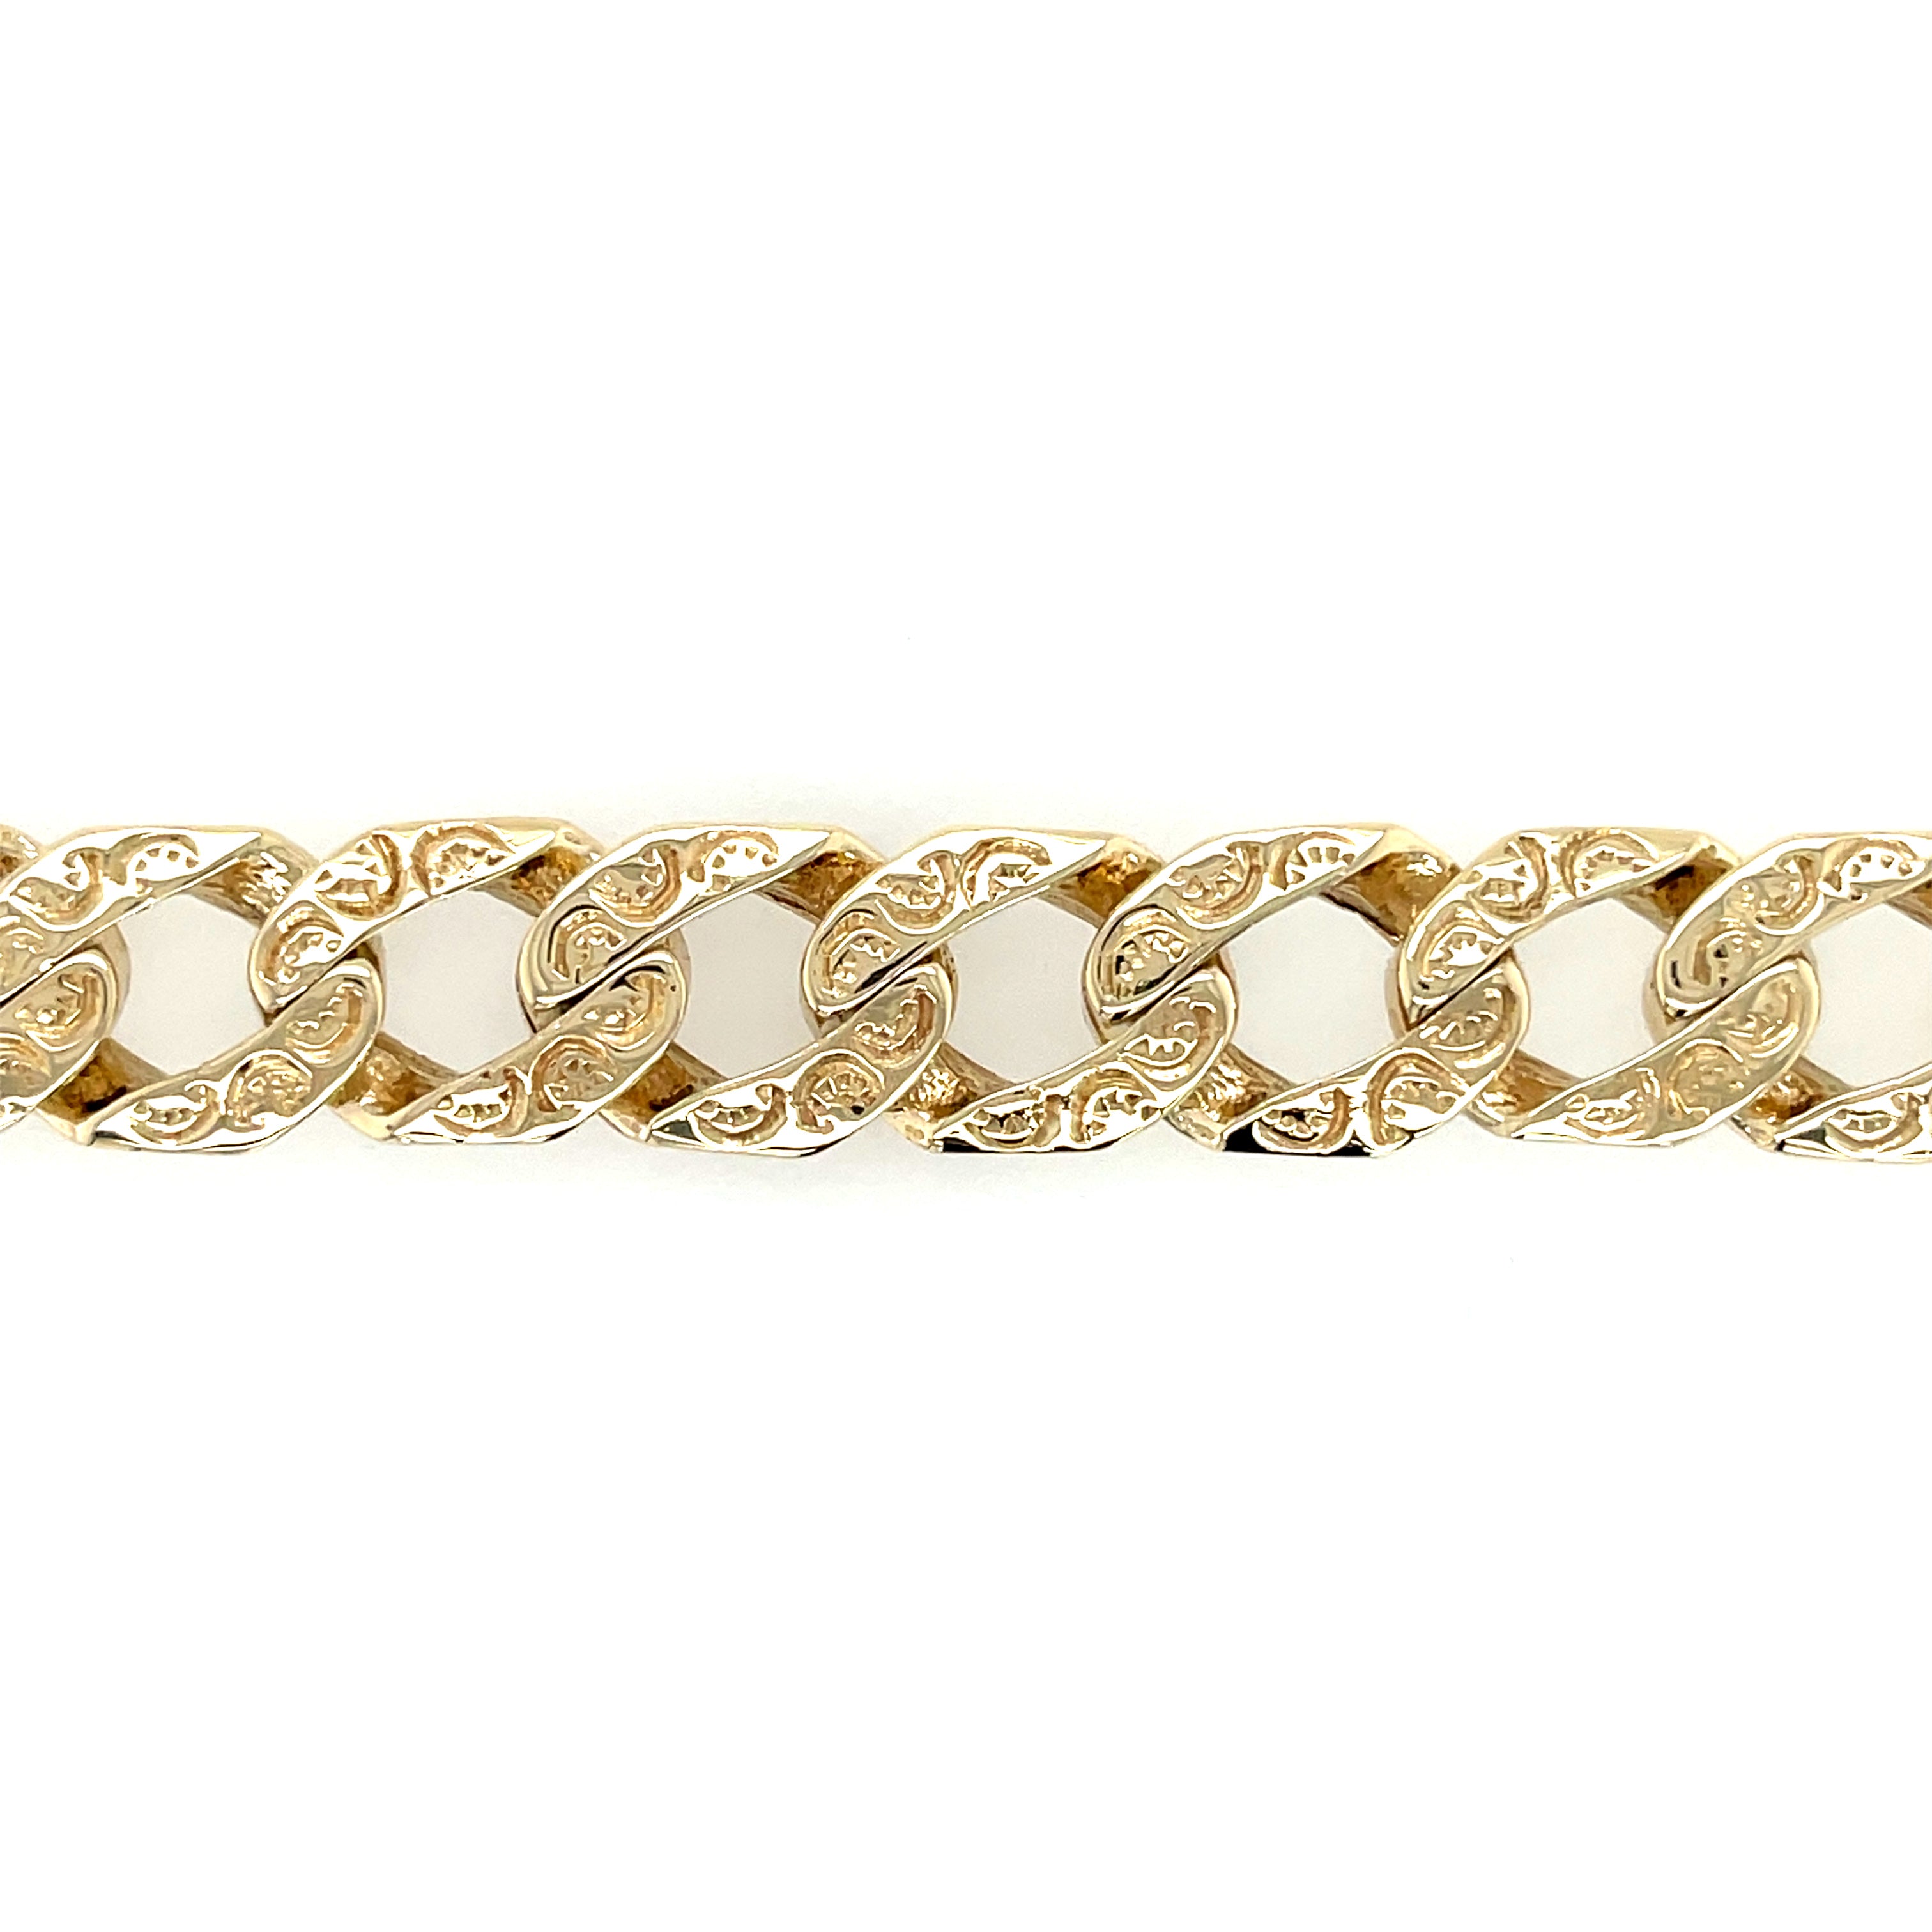 9ct Yellow Gold 8 Inch Patterned & Bark Effect Curb Bracelet - 31.80g